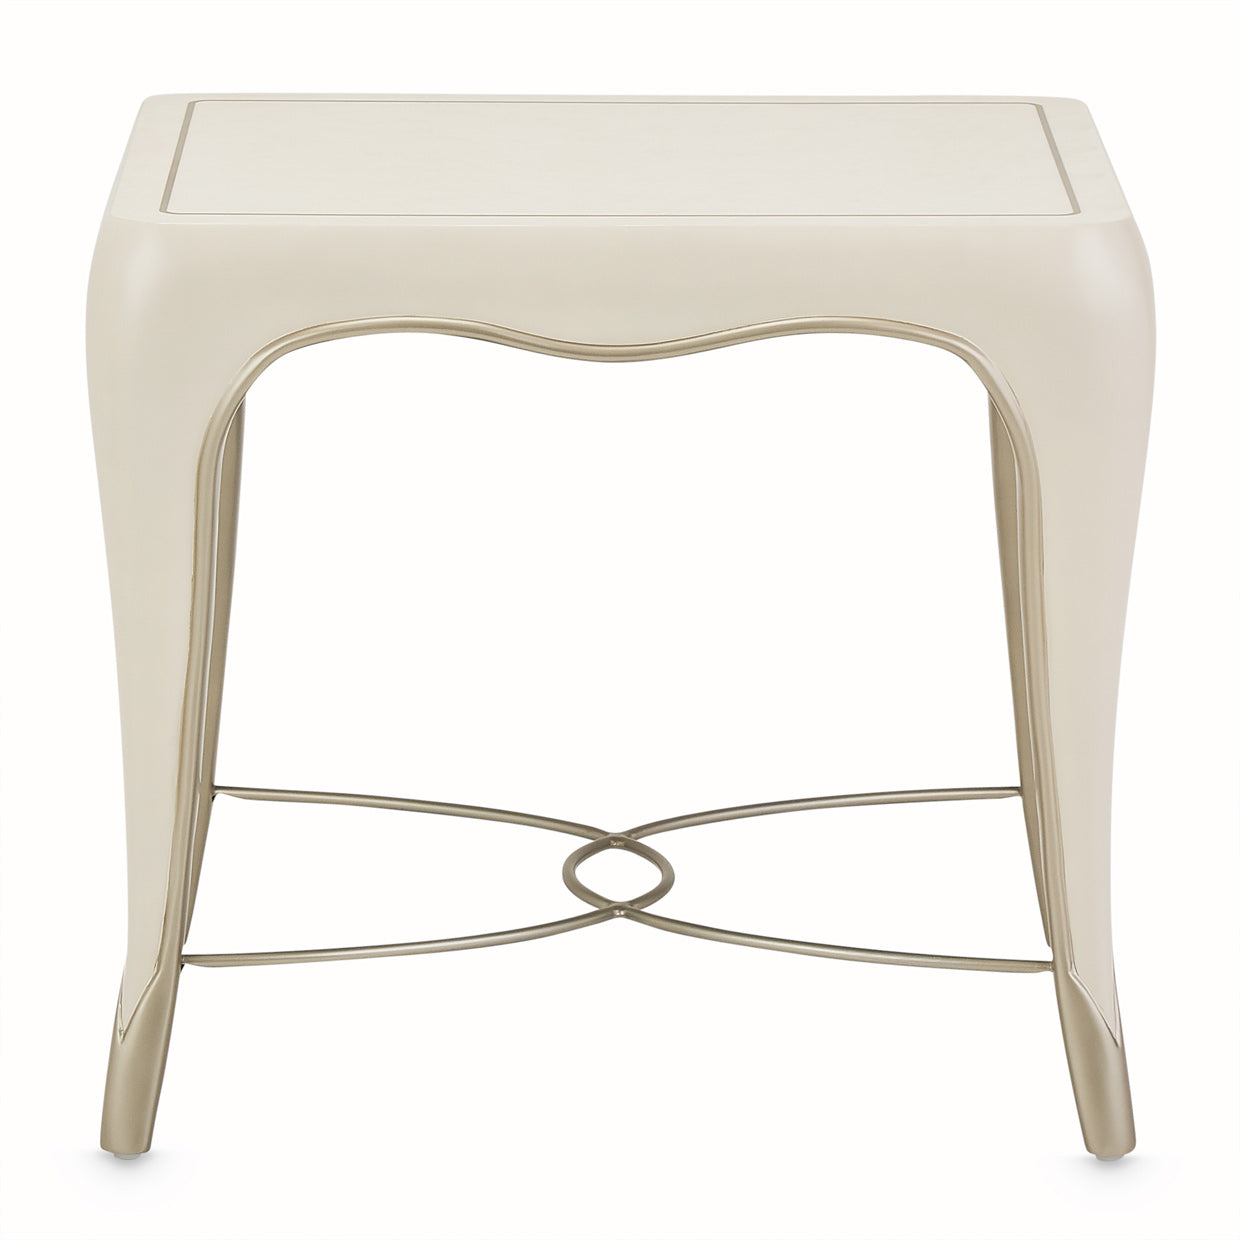 LONDON PLACE End Table - Dream art Gallery